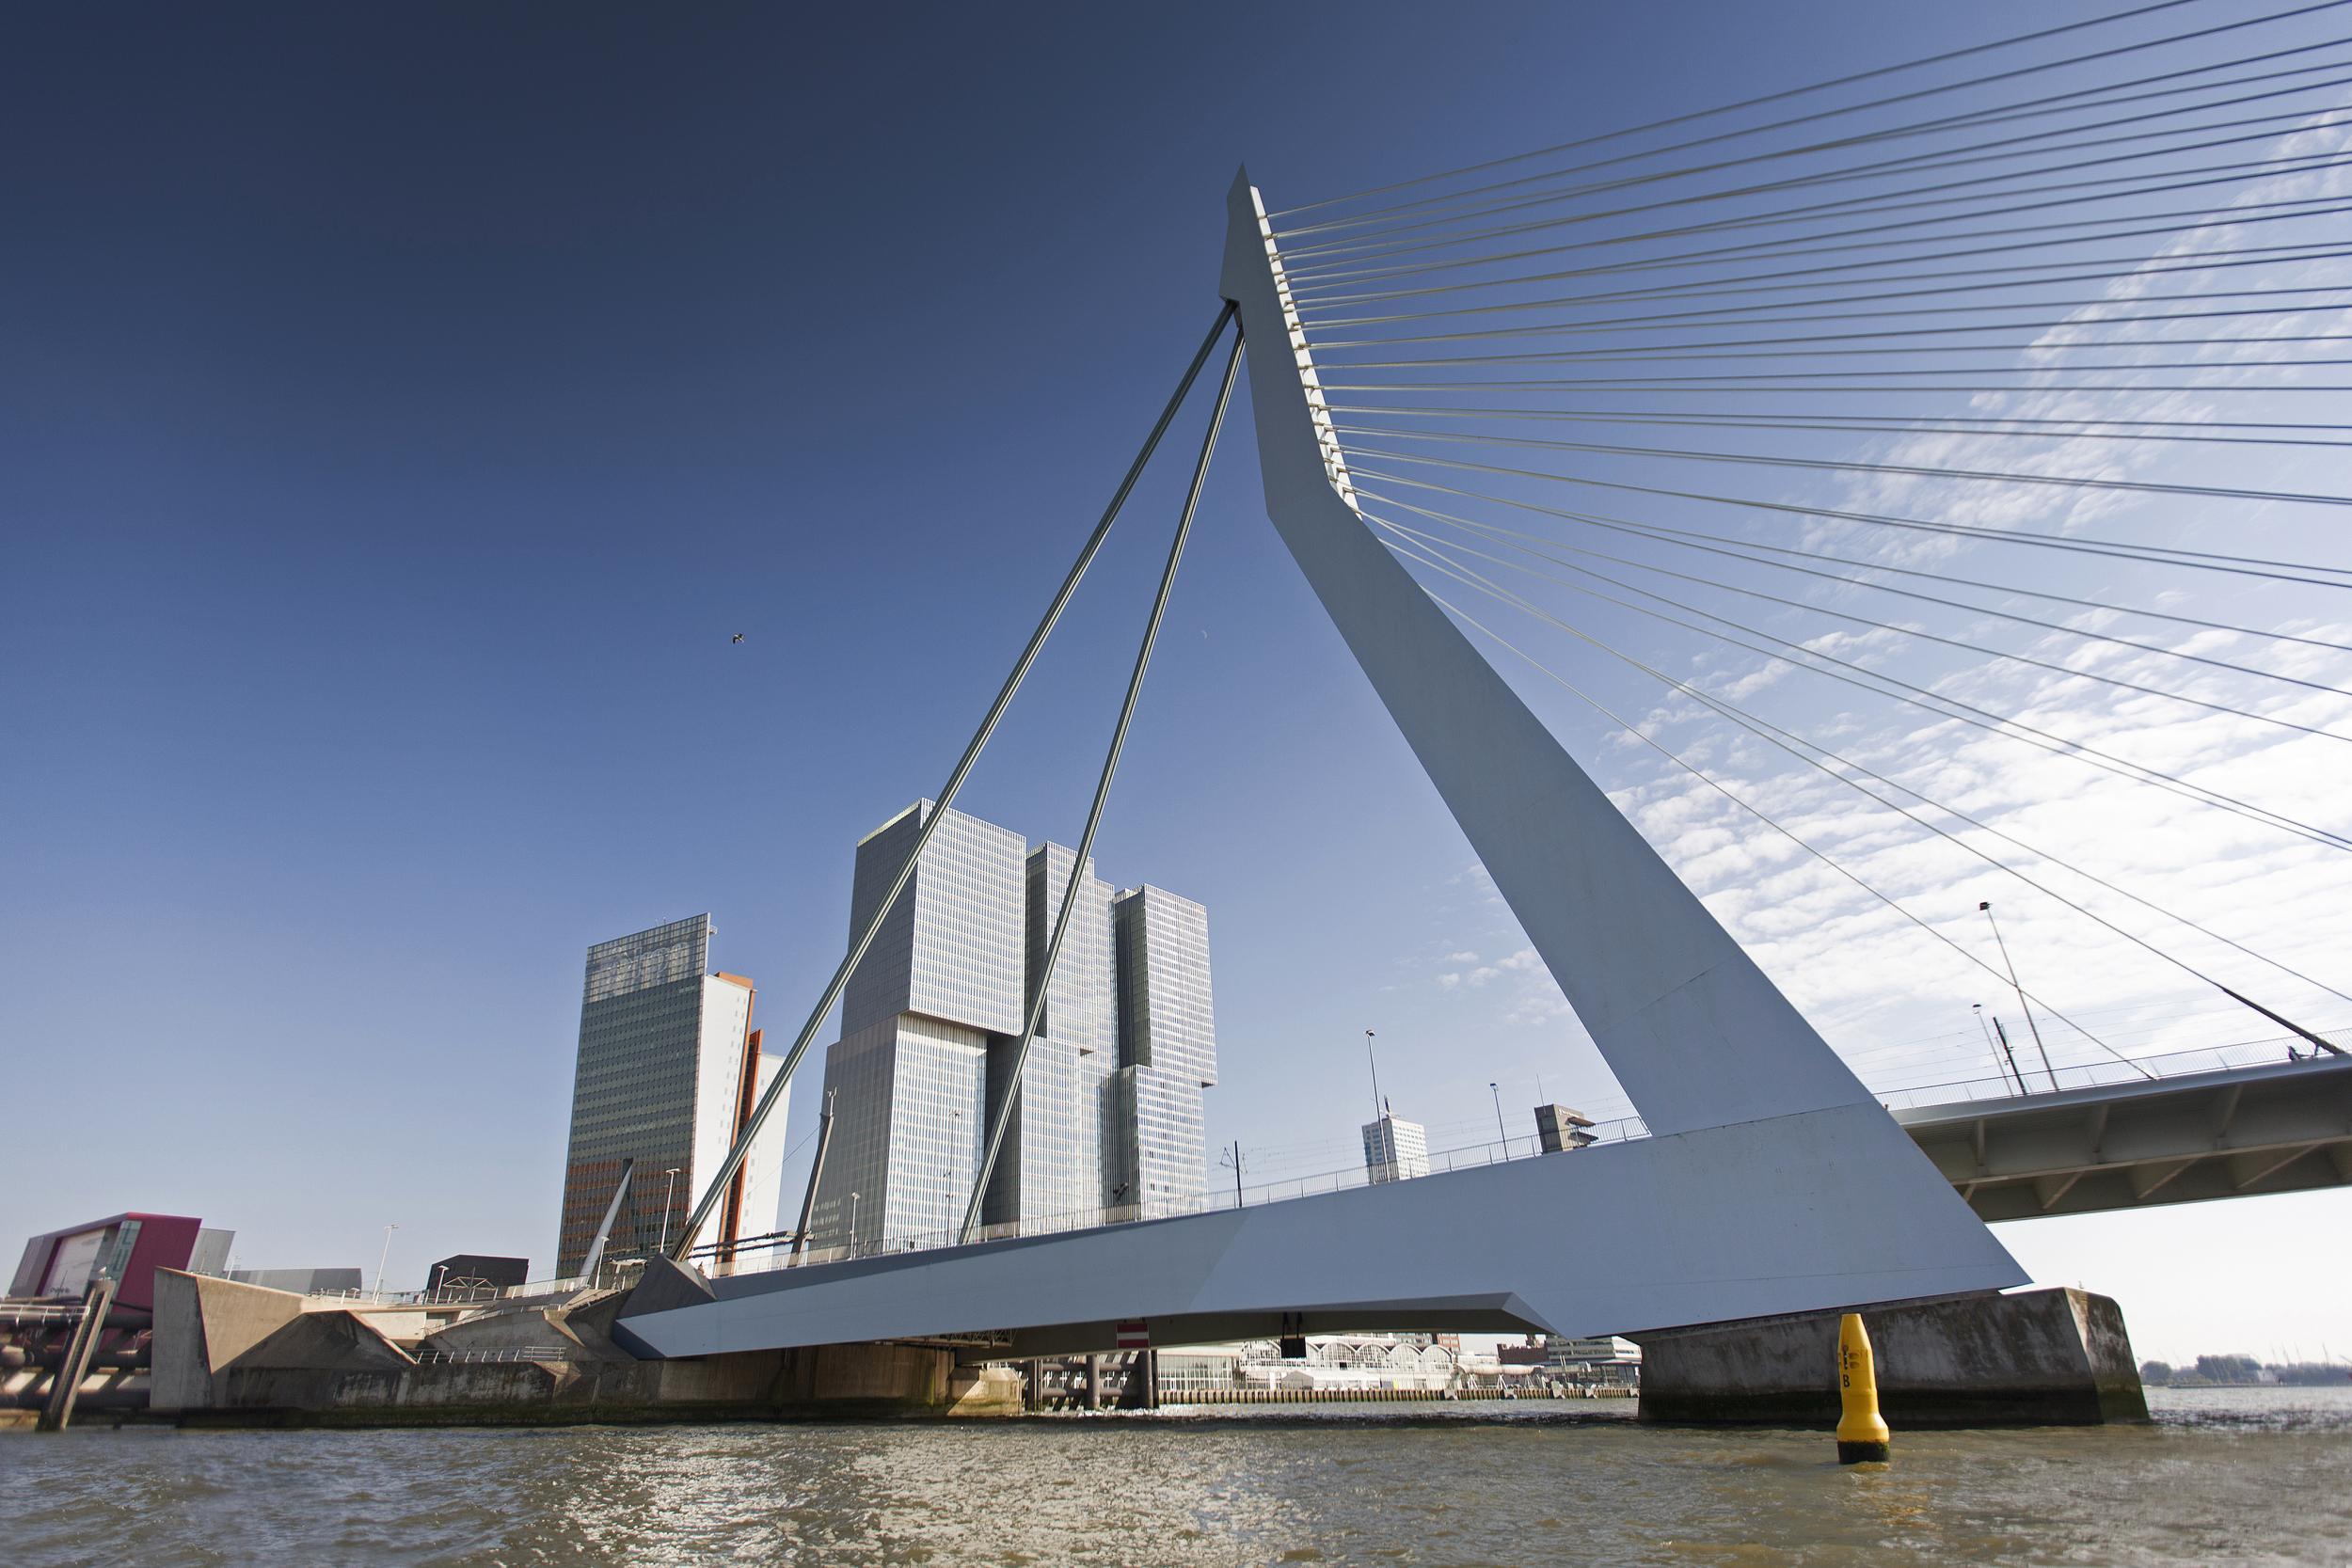 The city's landmark Erasmus Bridge, with the stacked glass towers of the De Rotterdam complex behind